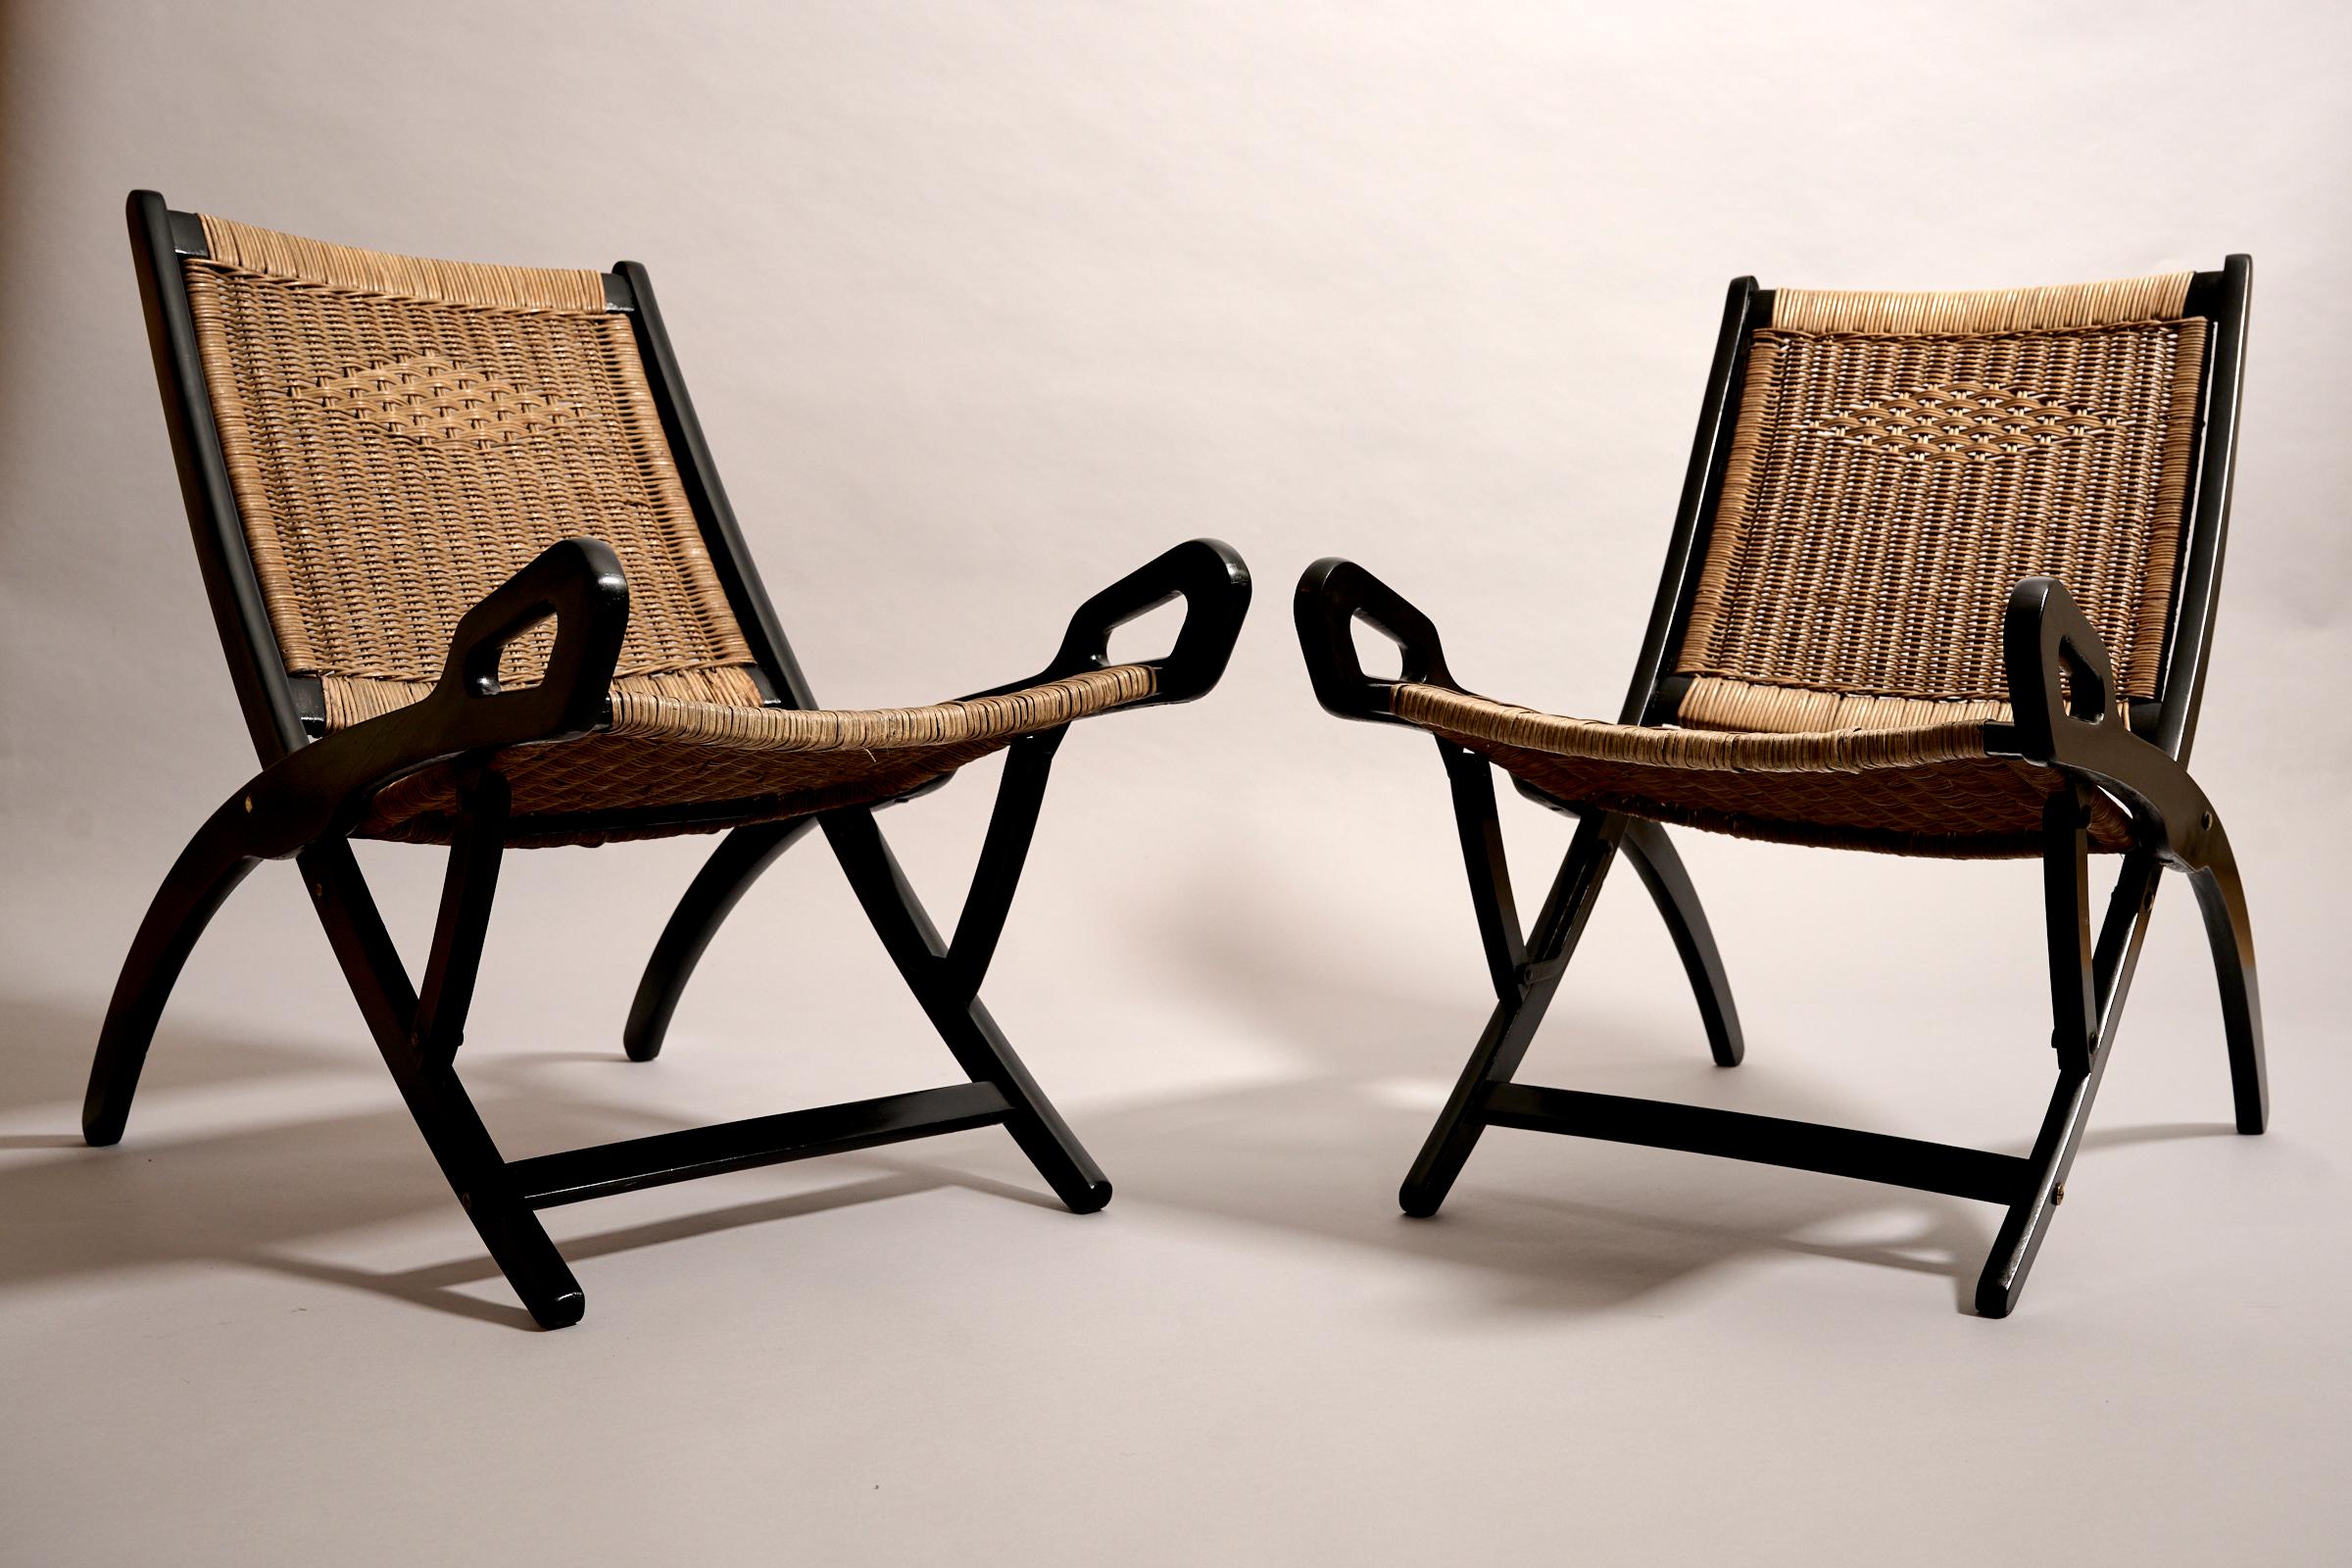 Original pair of Gio Ponti folding rattan chairs. For Fratelli Reguitti. Italy circa 1950s

ebonized wood and rattan. 

Restored. Fully functional. Surprisingly comfortable!